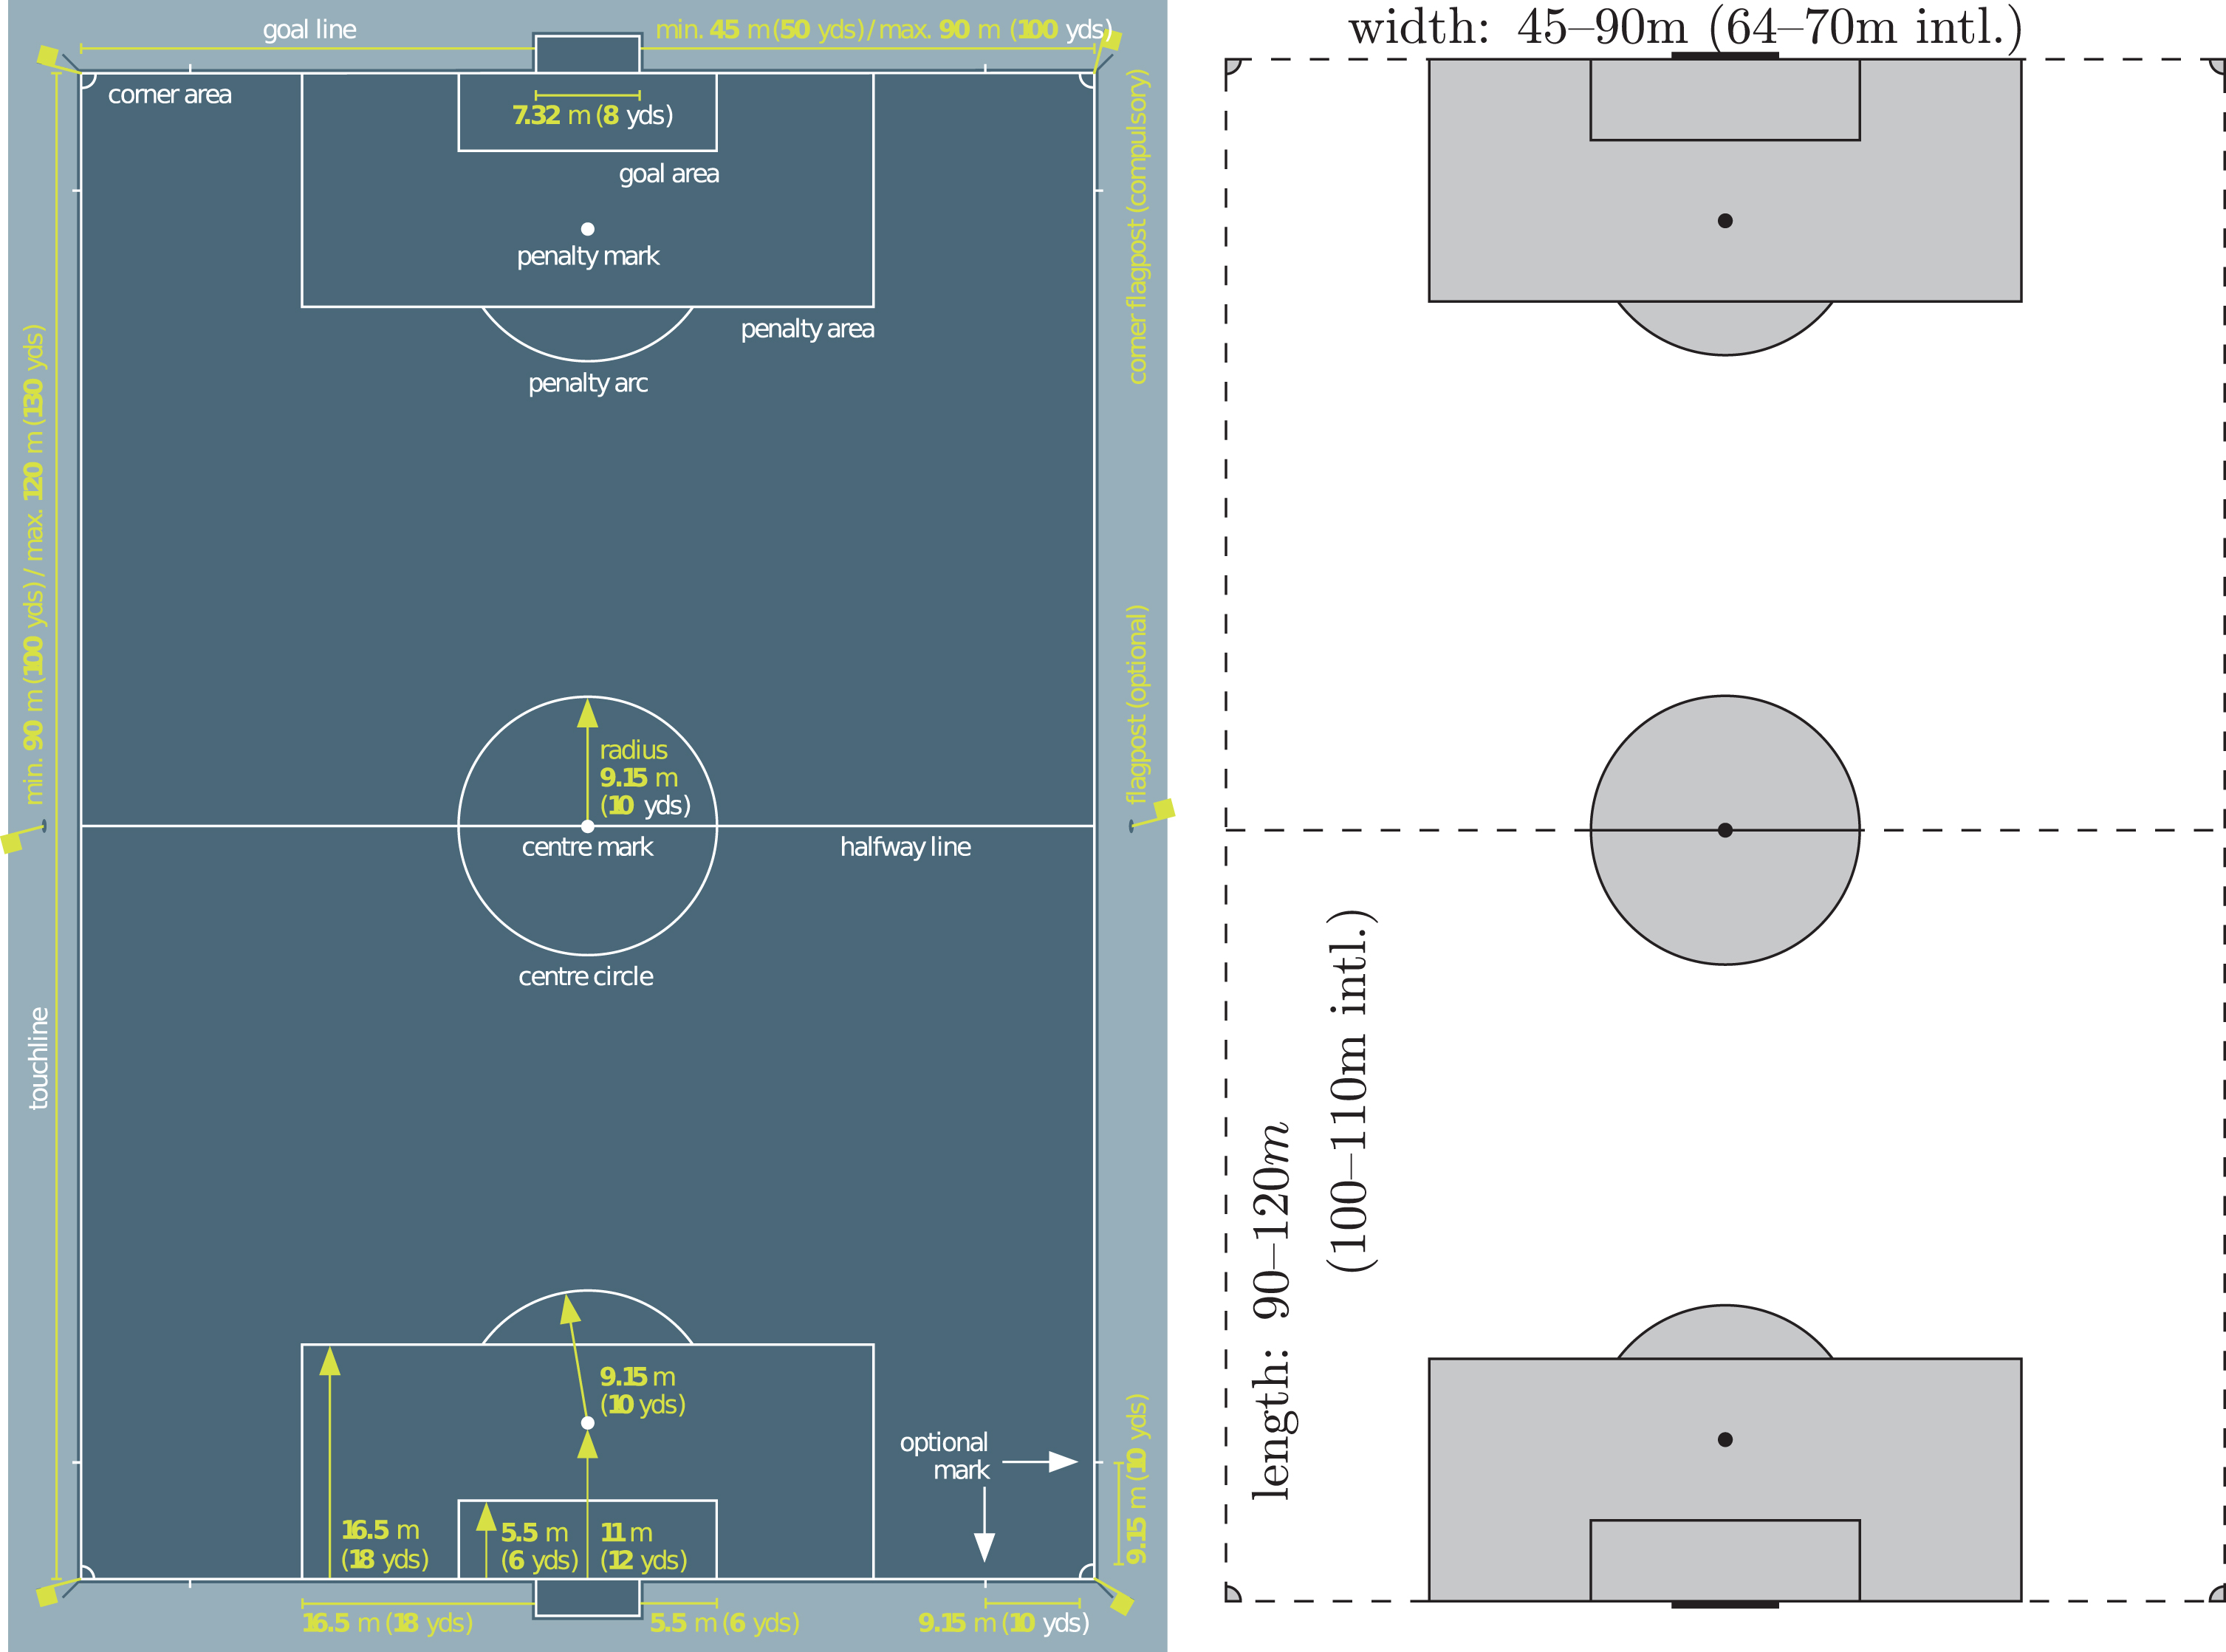 Field markings and their denominations in association football. Left: Specification diagram reproduced from the IFAB Laws of the Game  (The International Football Association Board, IFAB, 2022), where an inset with the corner arc radius specification of 1m/1yd has been removed from the original for simplicity. Right: Simplified representation in which dashed lines indicate dimensions that are variable, whereas gray areas and solid lines have fixed areas and lengths. Restrictions for international matches are tighter, and the touchlines (vertical length) must be longer than the goal lines (horizontal width). Since length and width may vary independently, a wide range of aspect ratios is admissible.